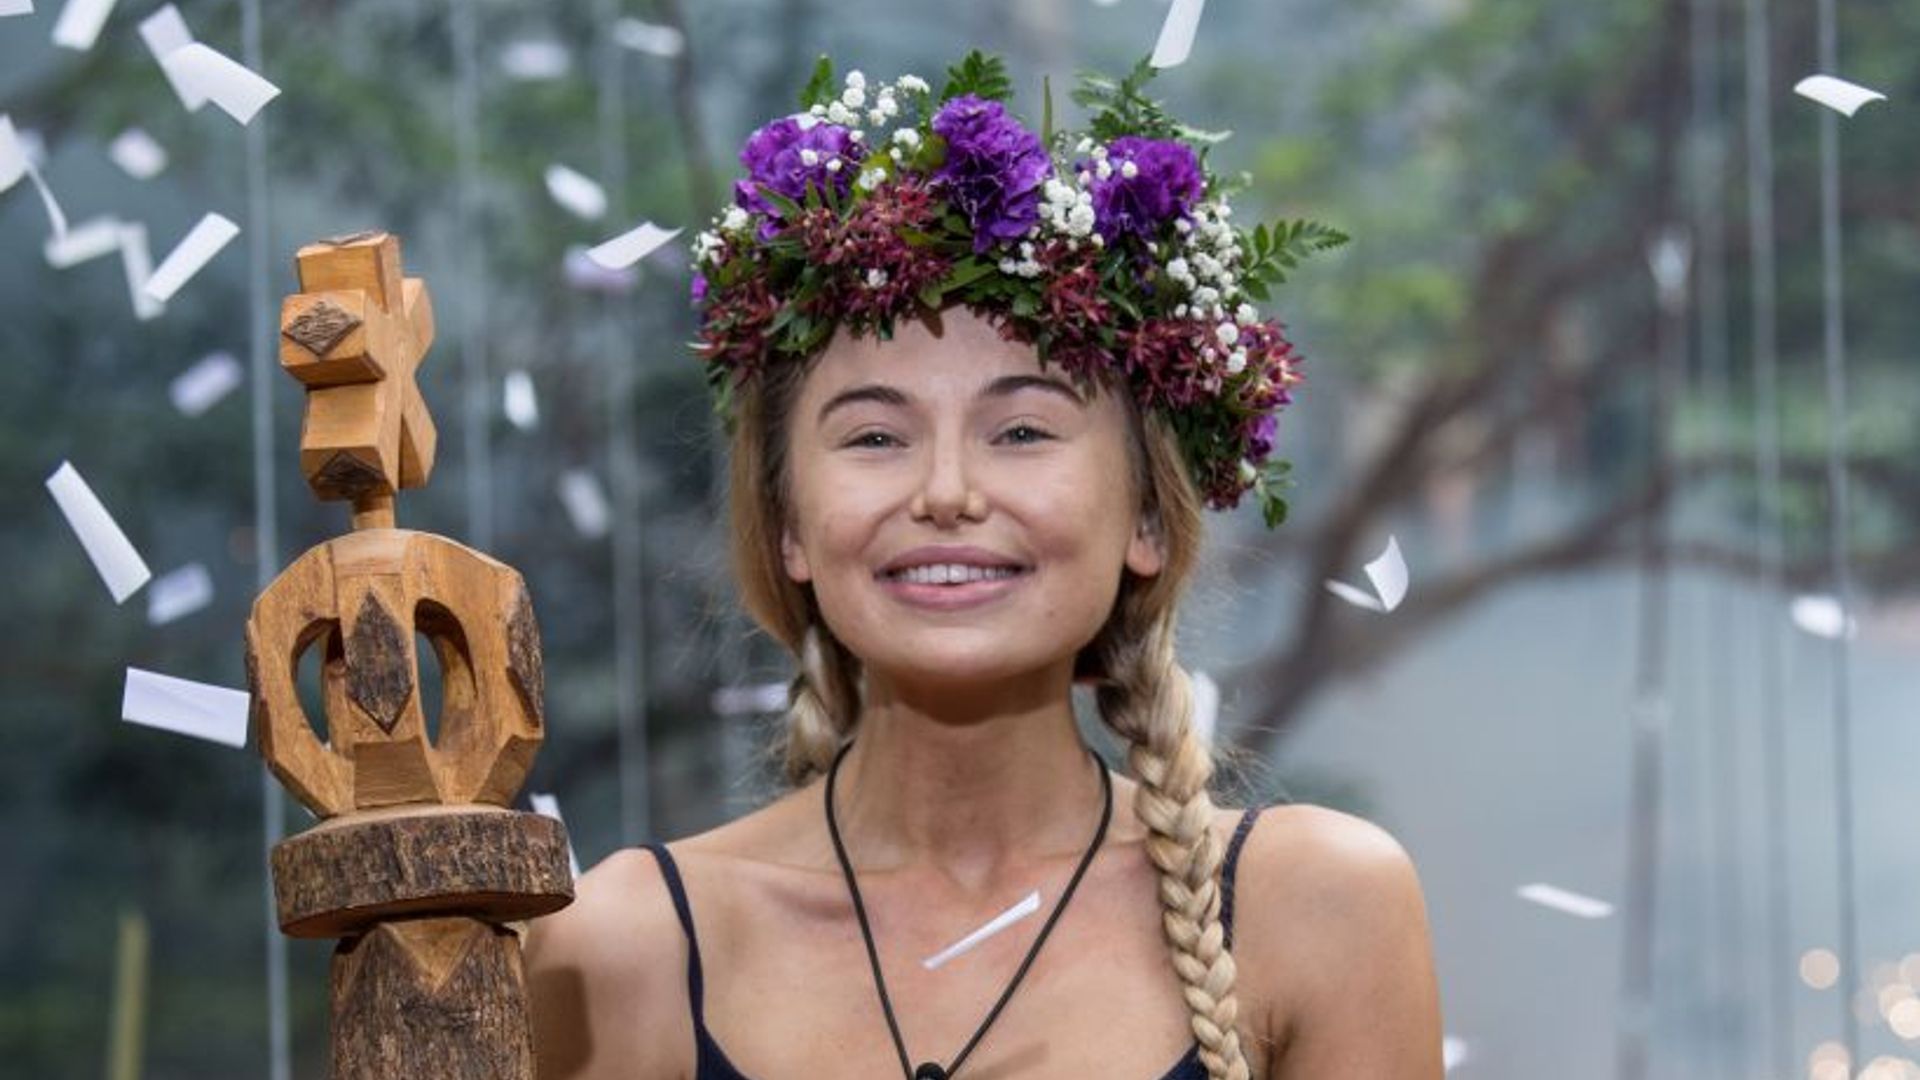 Georgia 'Toff' Toffolo crowned winner of I'm a Celebrity 2017